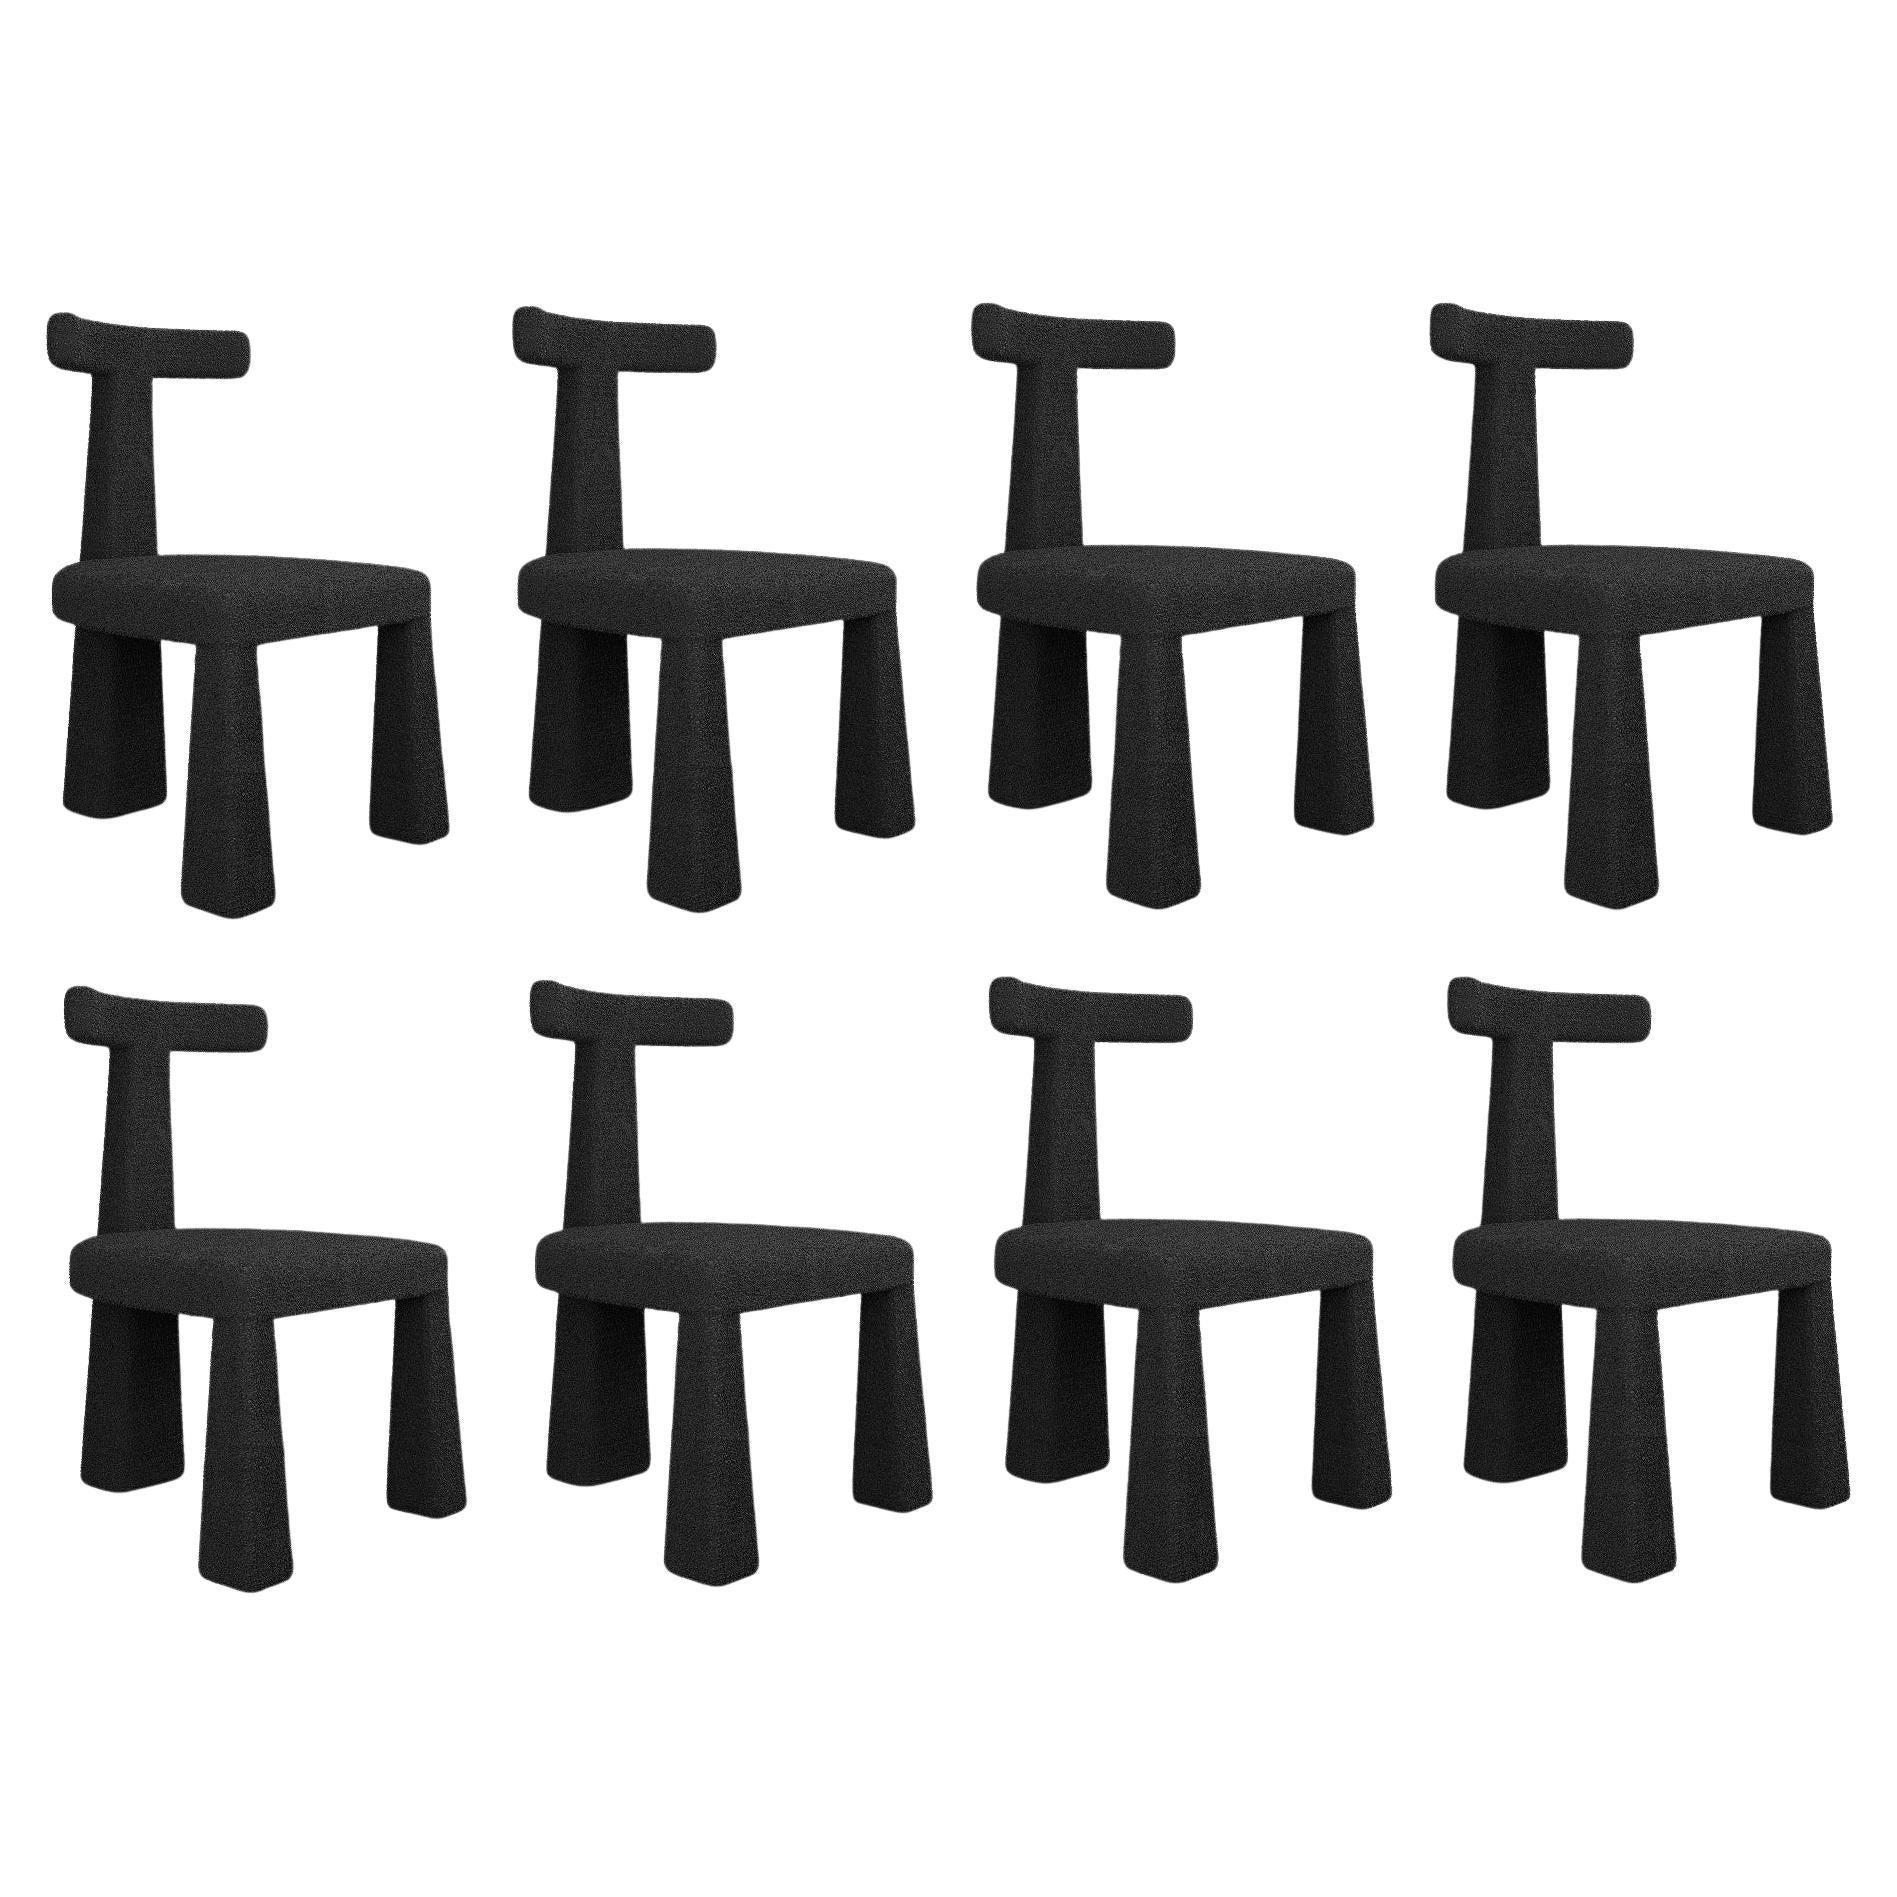 Contemporary Dining Chairs Featuring Minimalist Design with Three Legs-Set of 8 For Sale